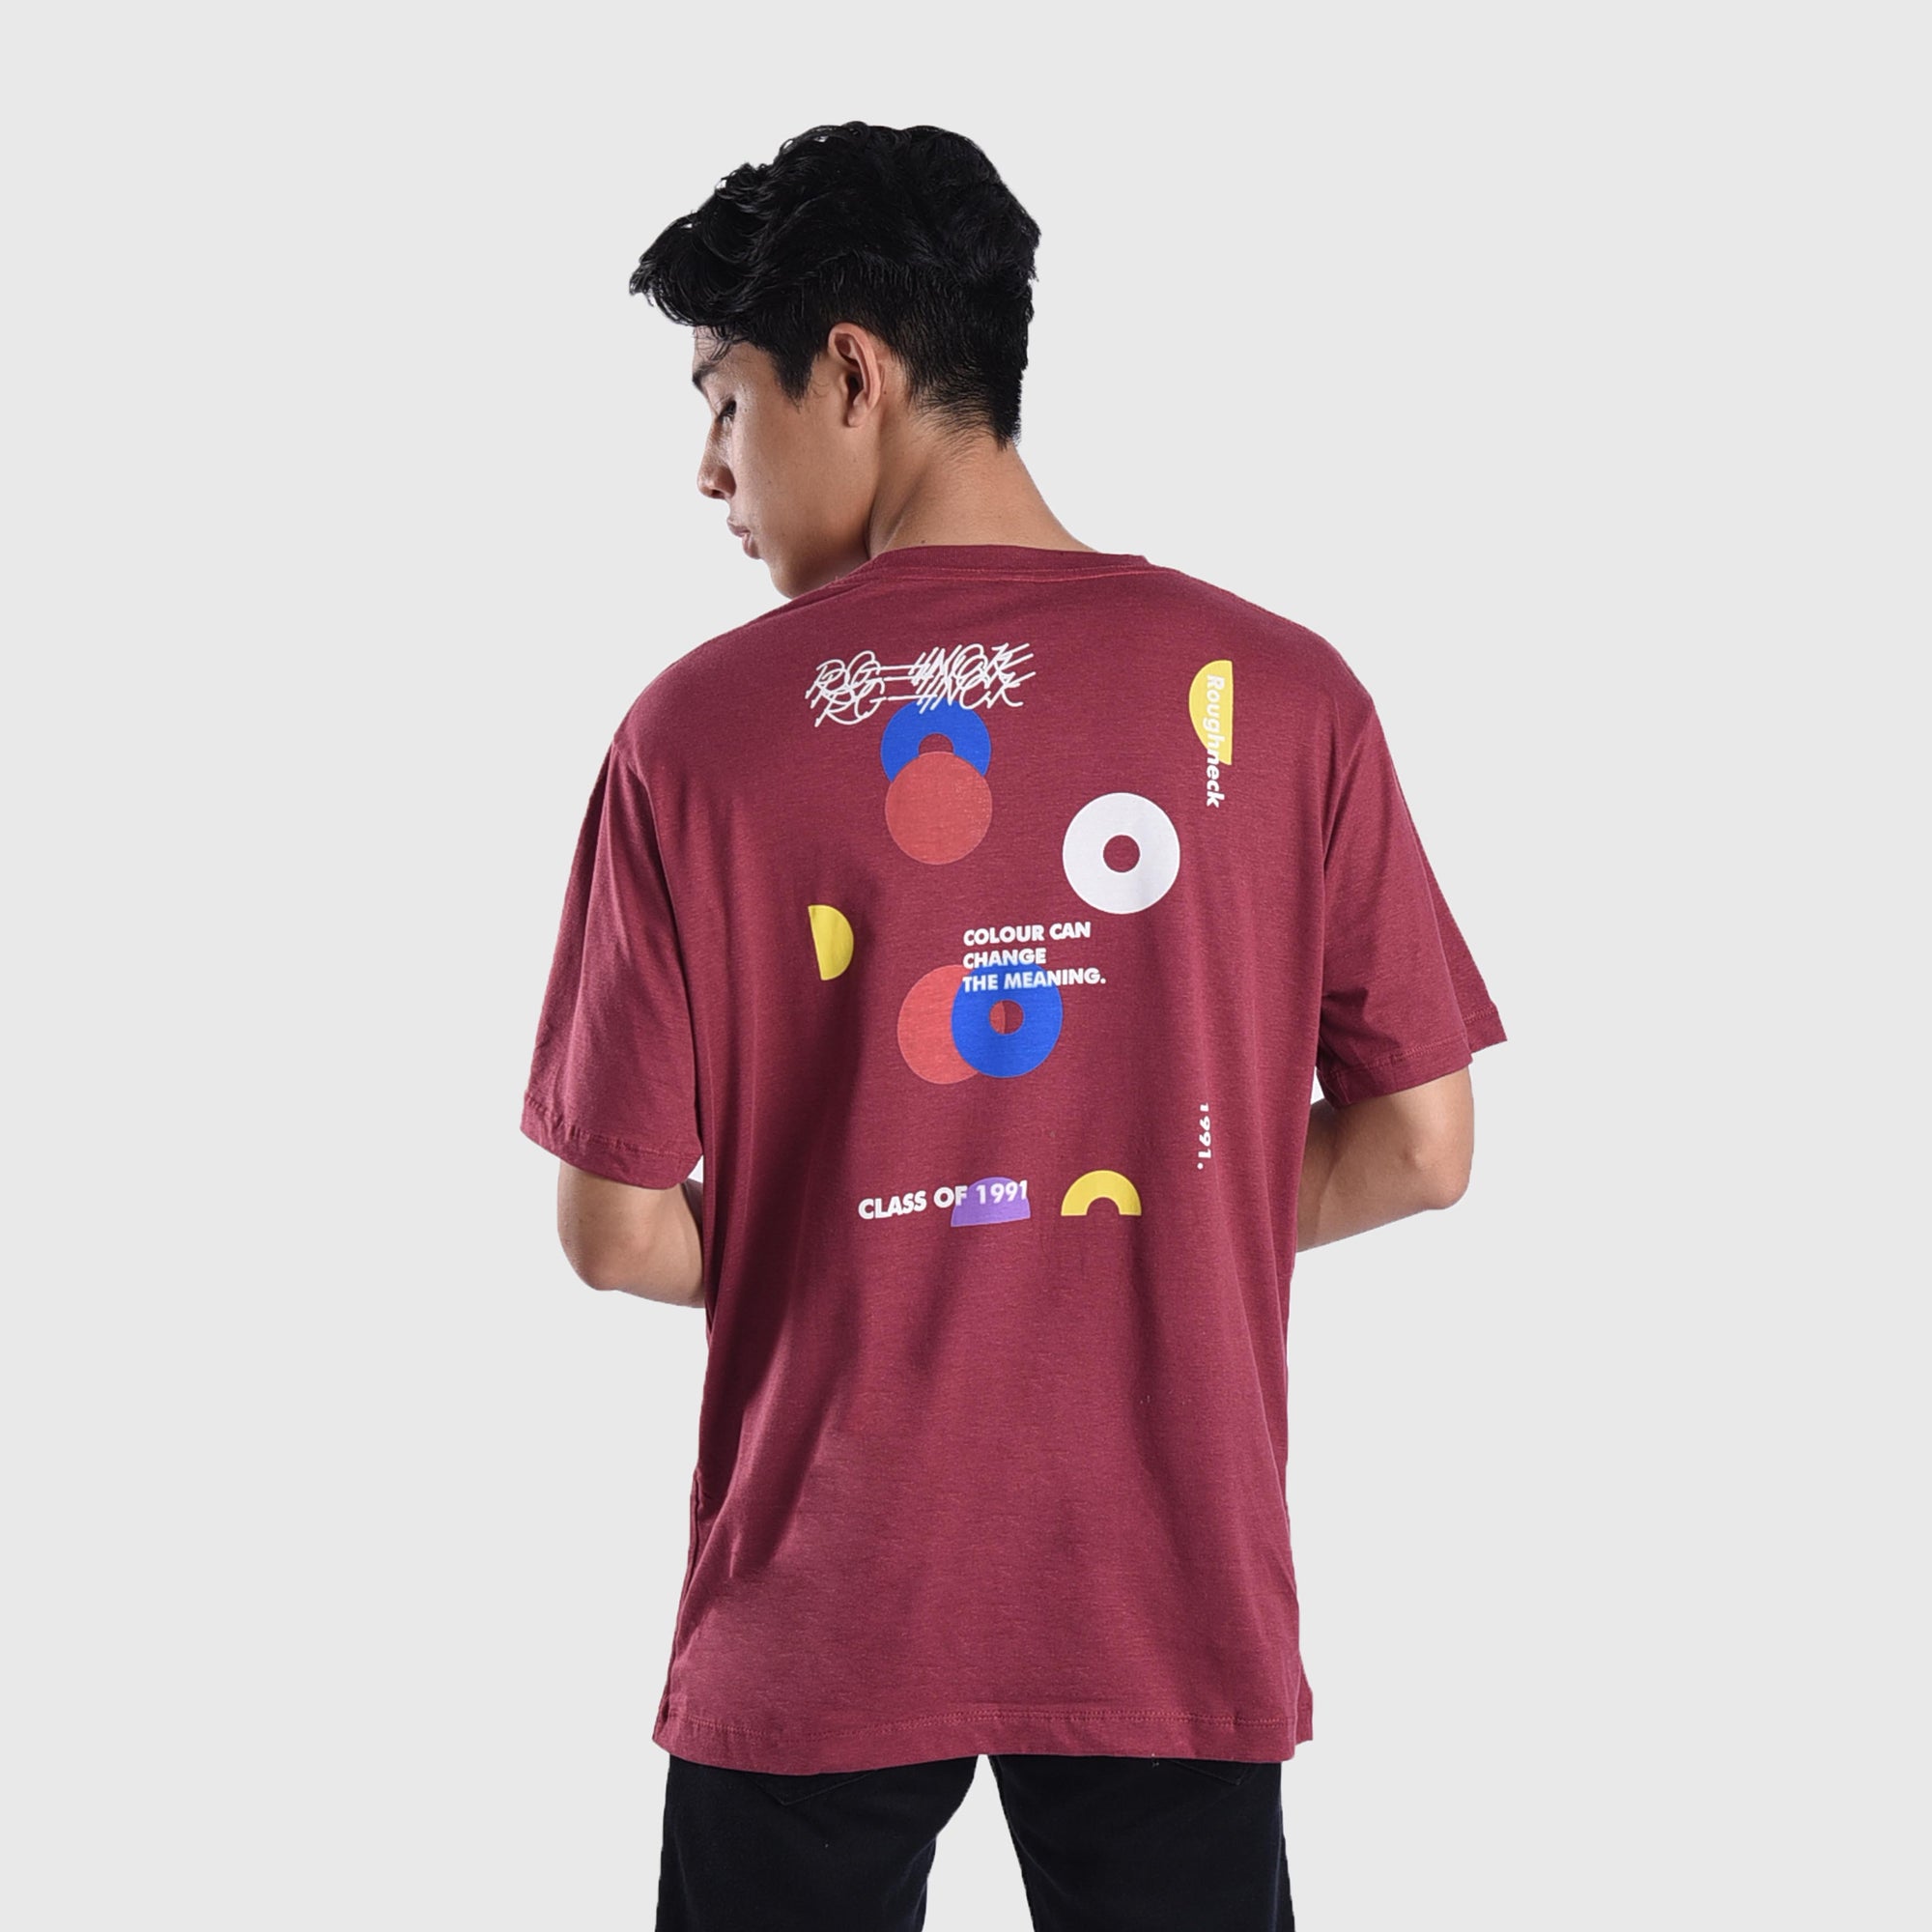 T553 Maroon Change The Meaning Tshirt